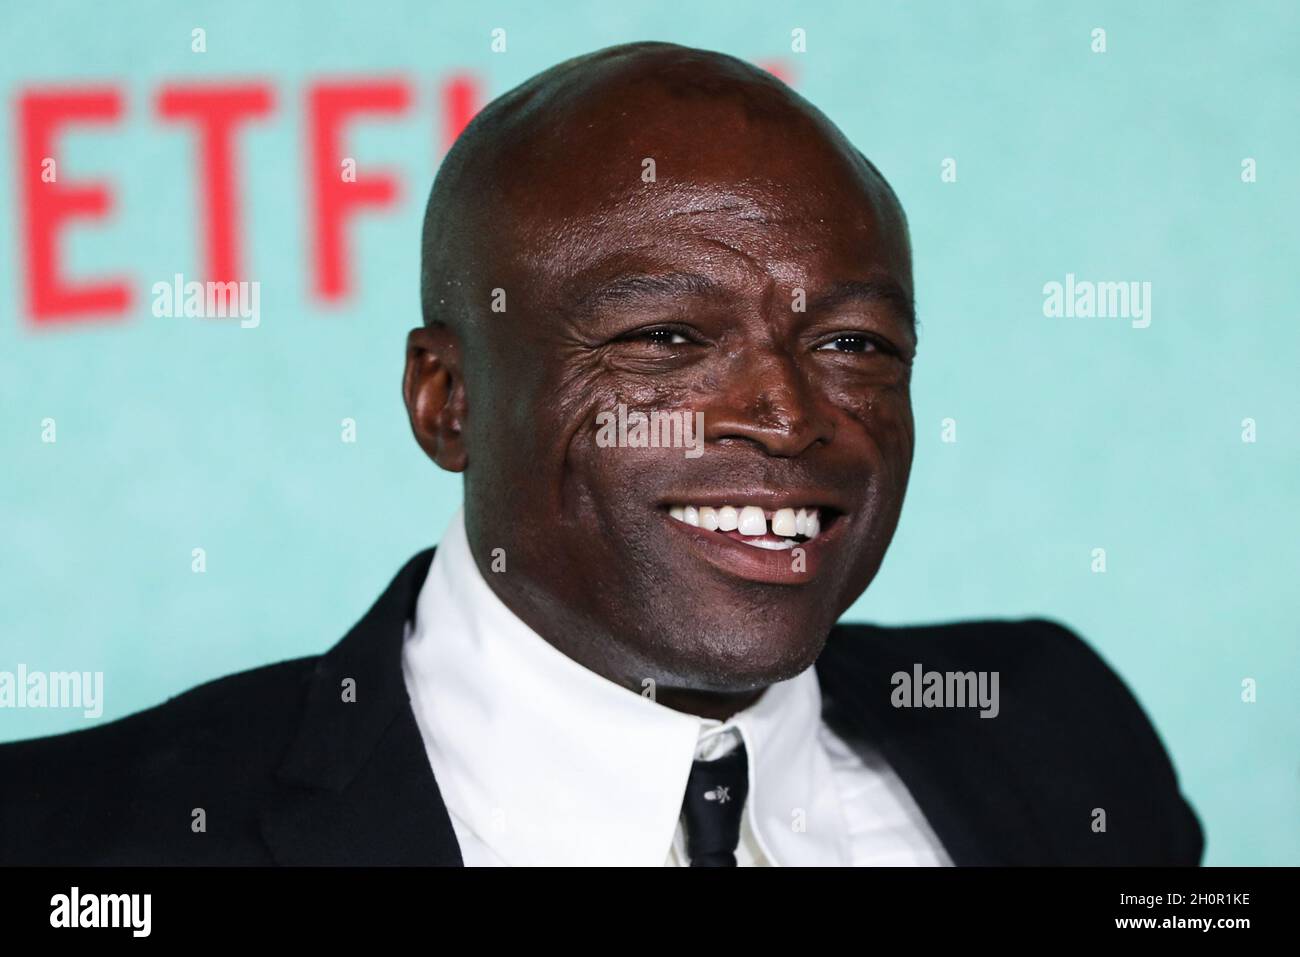 LOS ANGELES, CALIFORNIA, USA - OCTOBER 13: Singer-songwriter Seal (Henry Olusegun Adeola Samuel) arrives at the Los Angeles Premiere Of Netflix's 'The Harder They Fall' held at the Shrine Auditorium and Expo Hall on October 13, 2021 in Los Angeles, California, United States. (Photo by Xavier Collin/Image Press Agency) Stock Photo